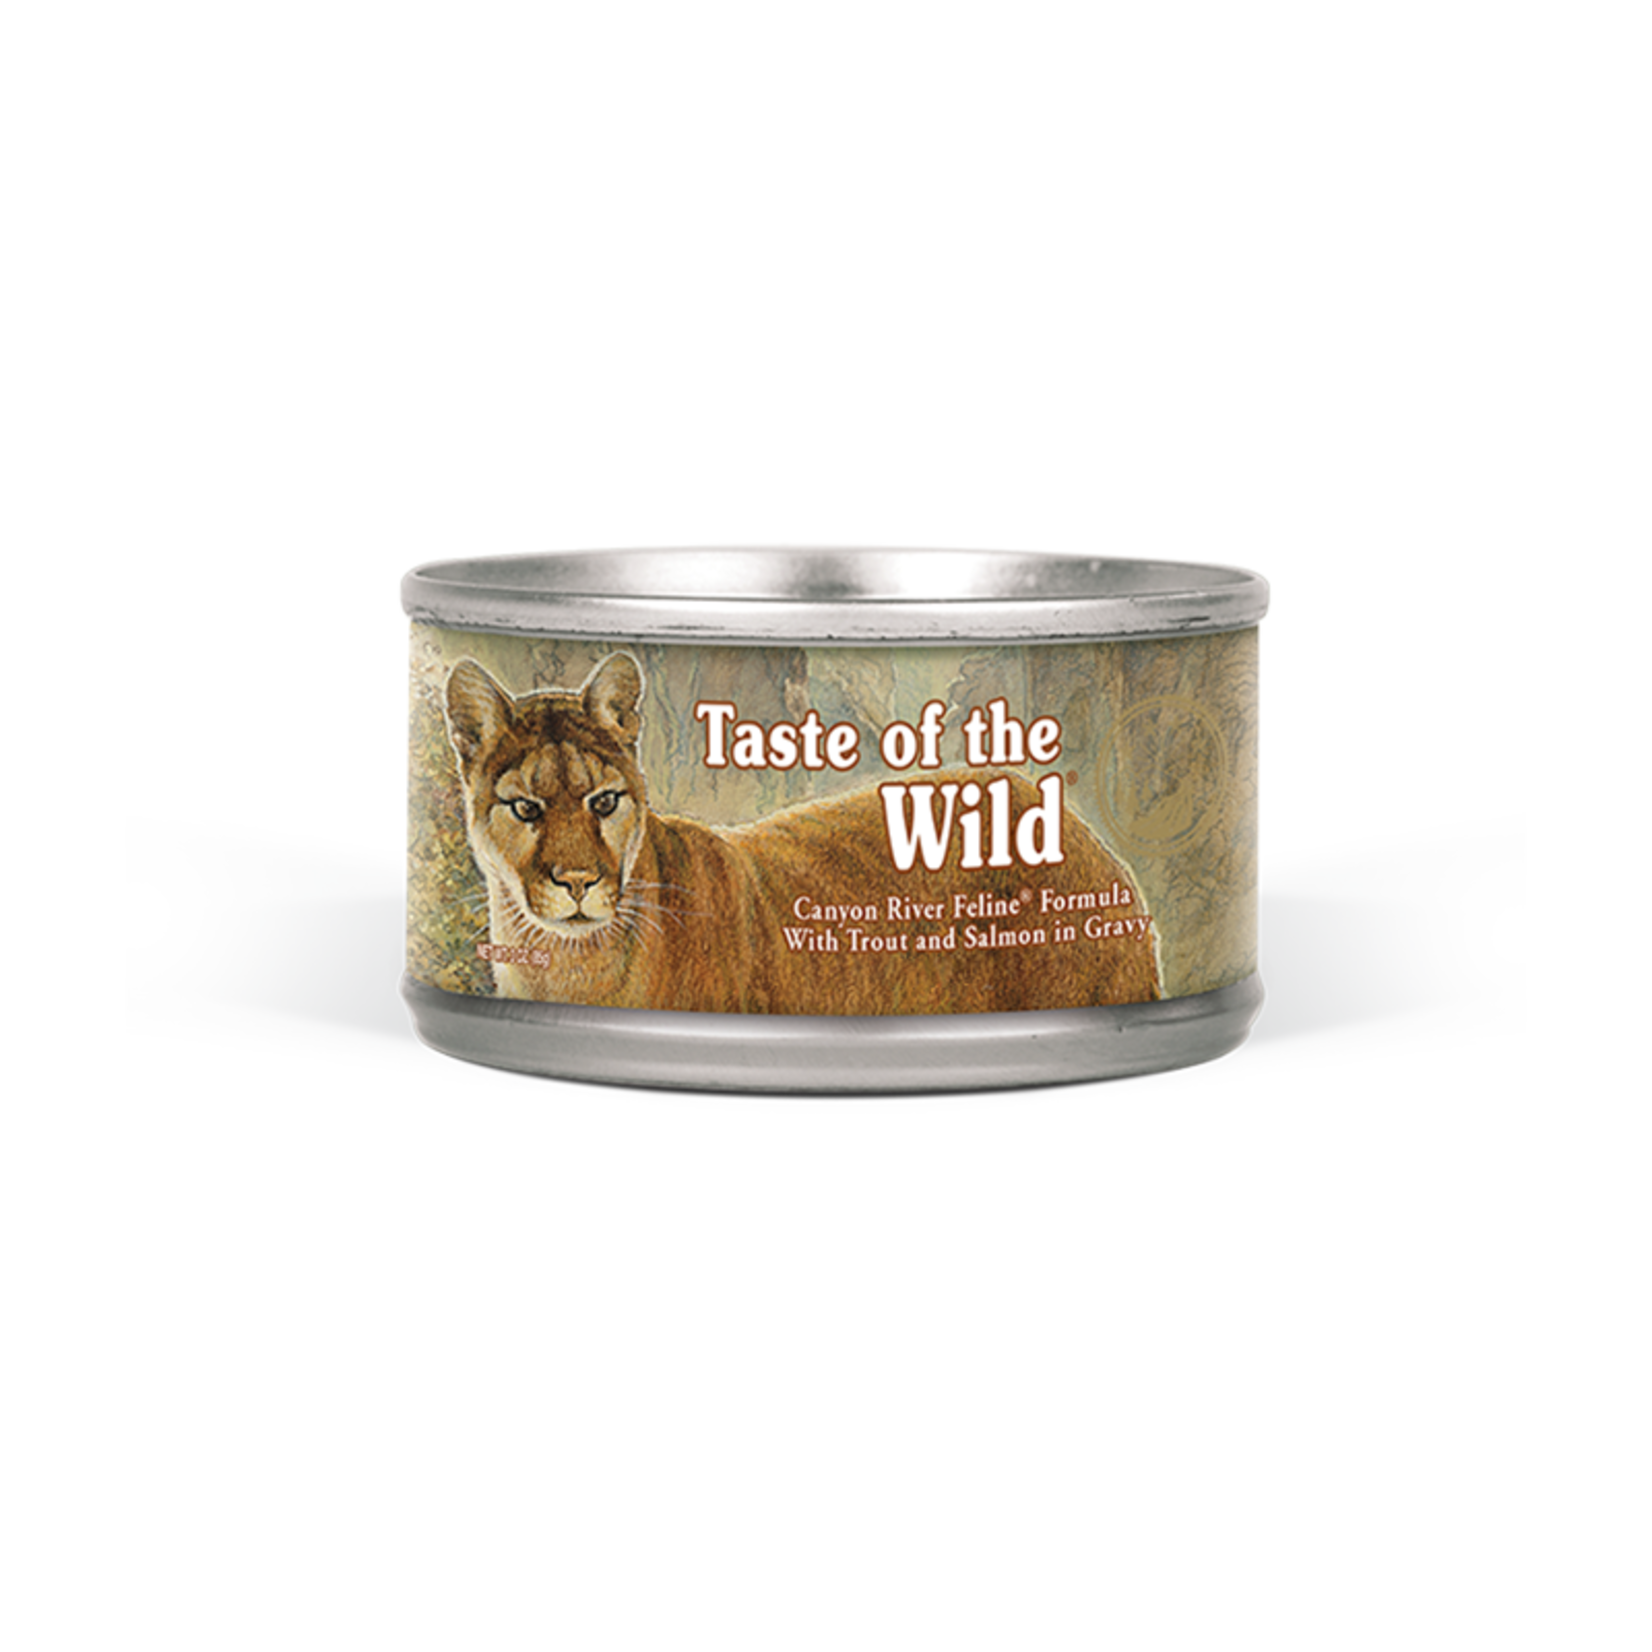 Taste of the Wild Taste of the Wild Wet Cat Food Canyon River Formula with Trout & Salmon in Gravy 3oz Can Grain Free